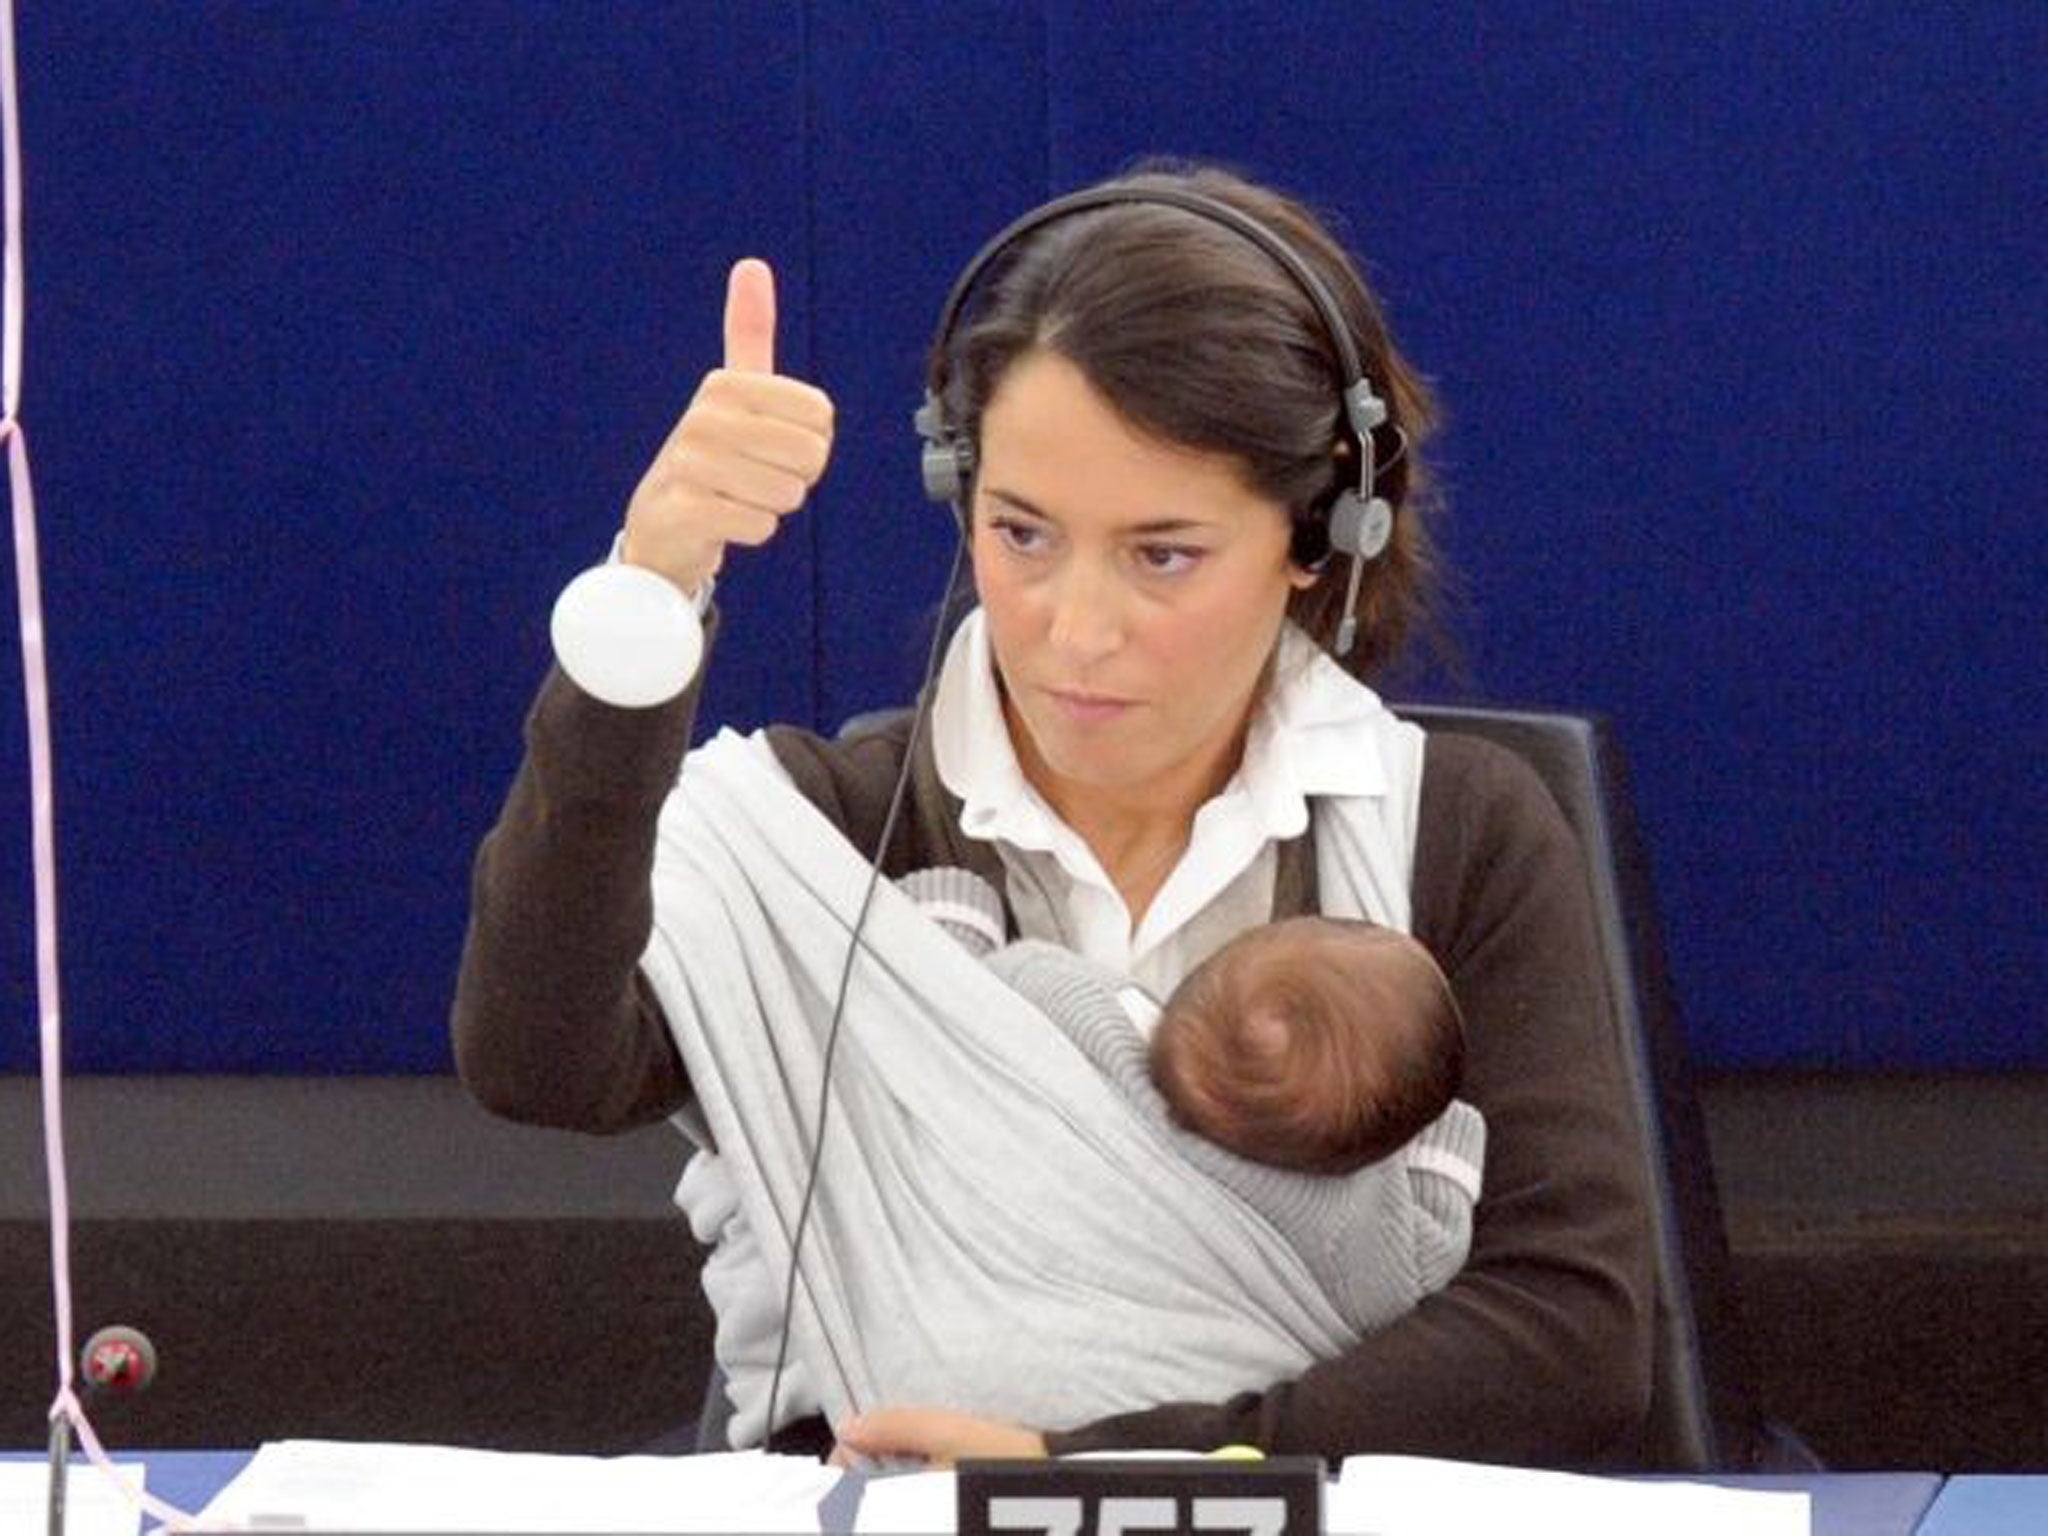 Italian MEP Licia Ronzulli votes for maternity rights